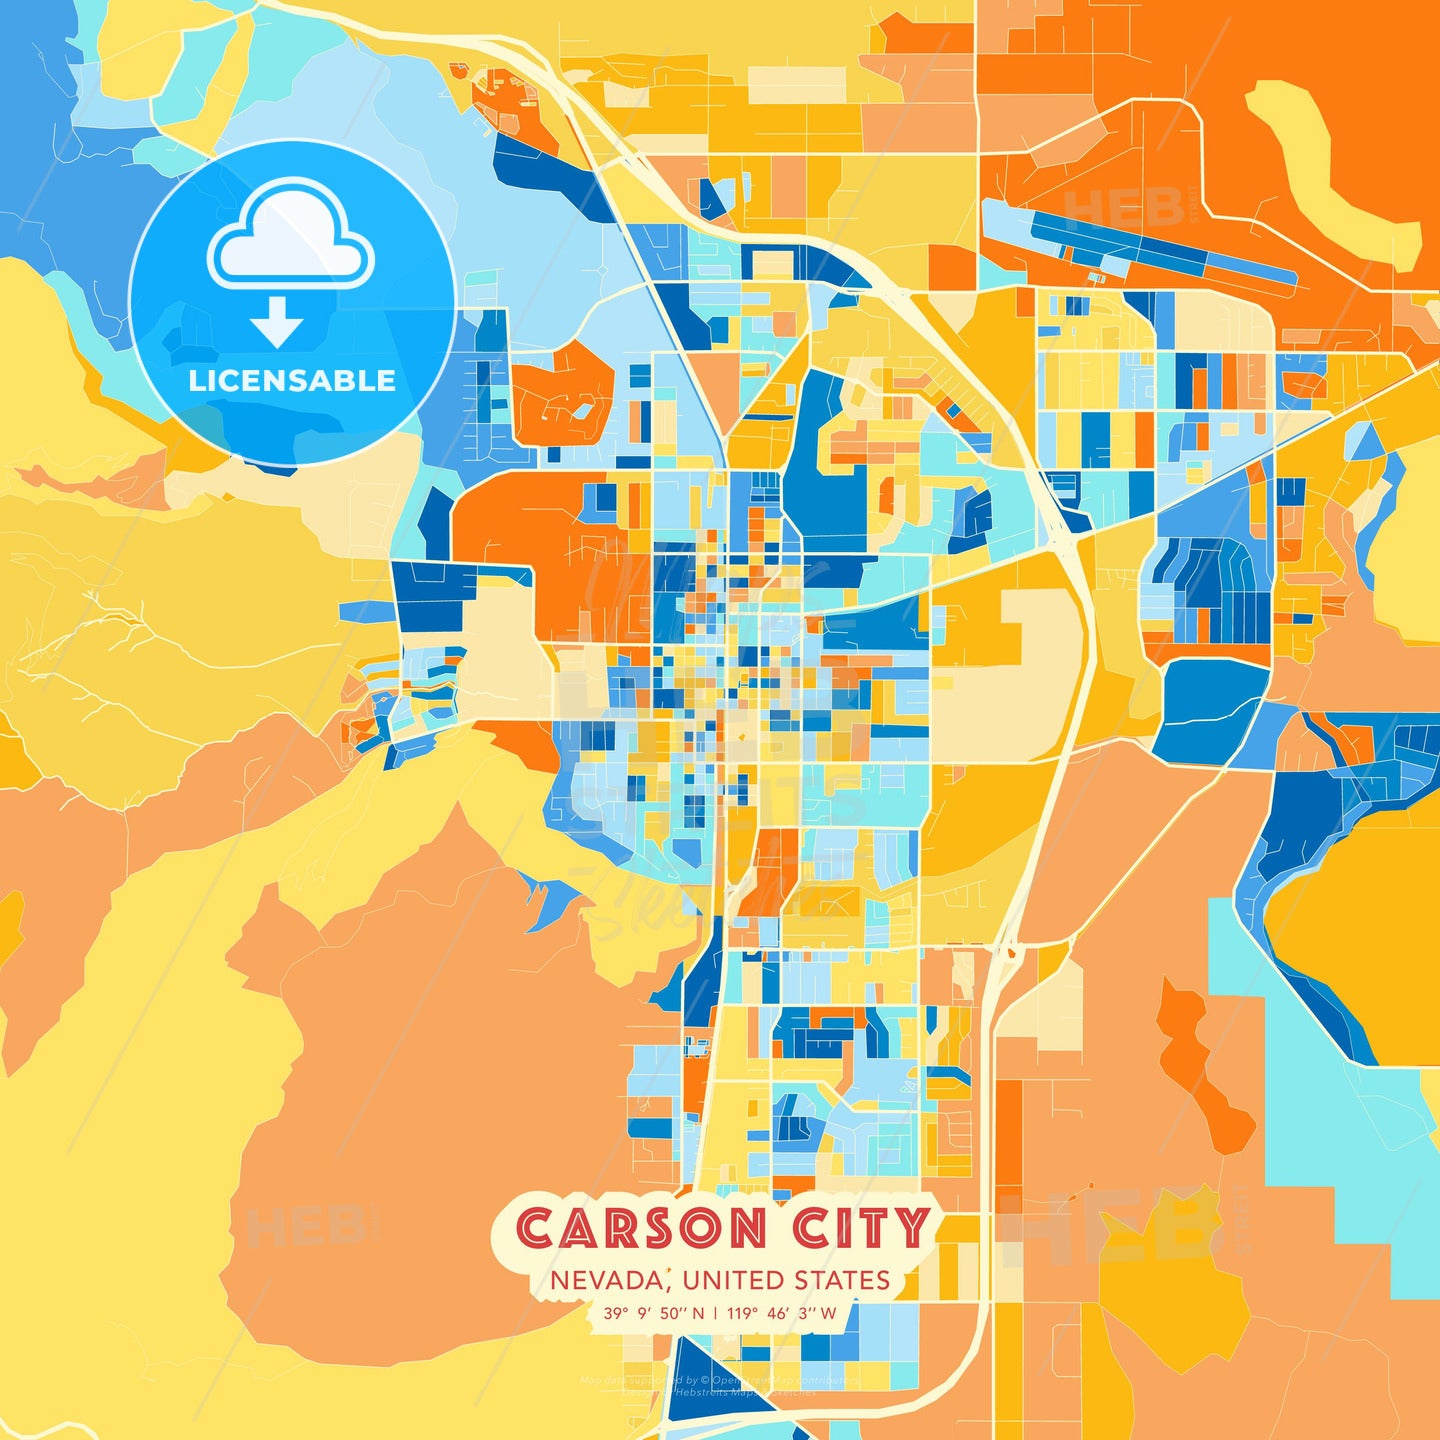 Carson City, Nevada, United States, map - HEBSTREITS Sketches